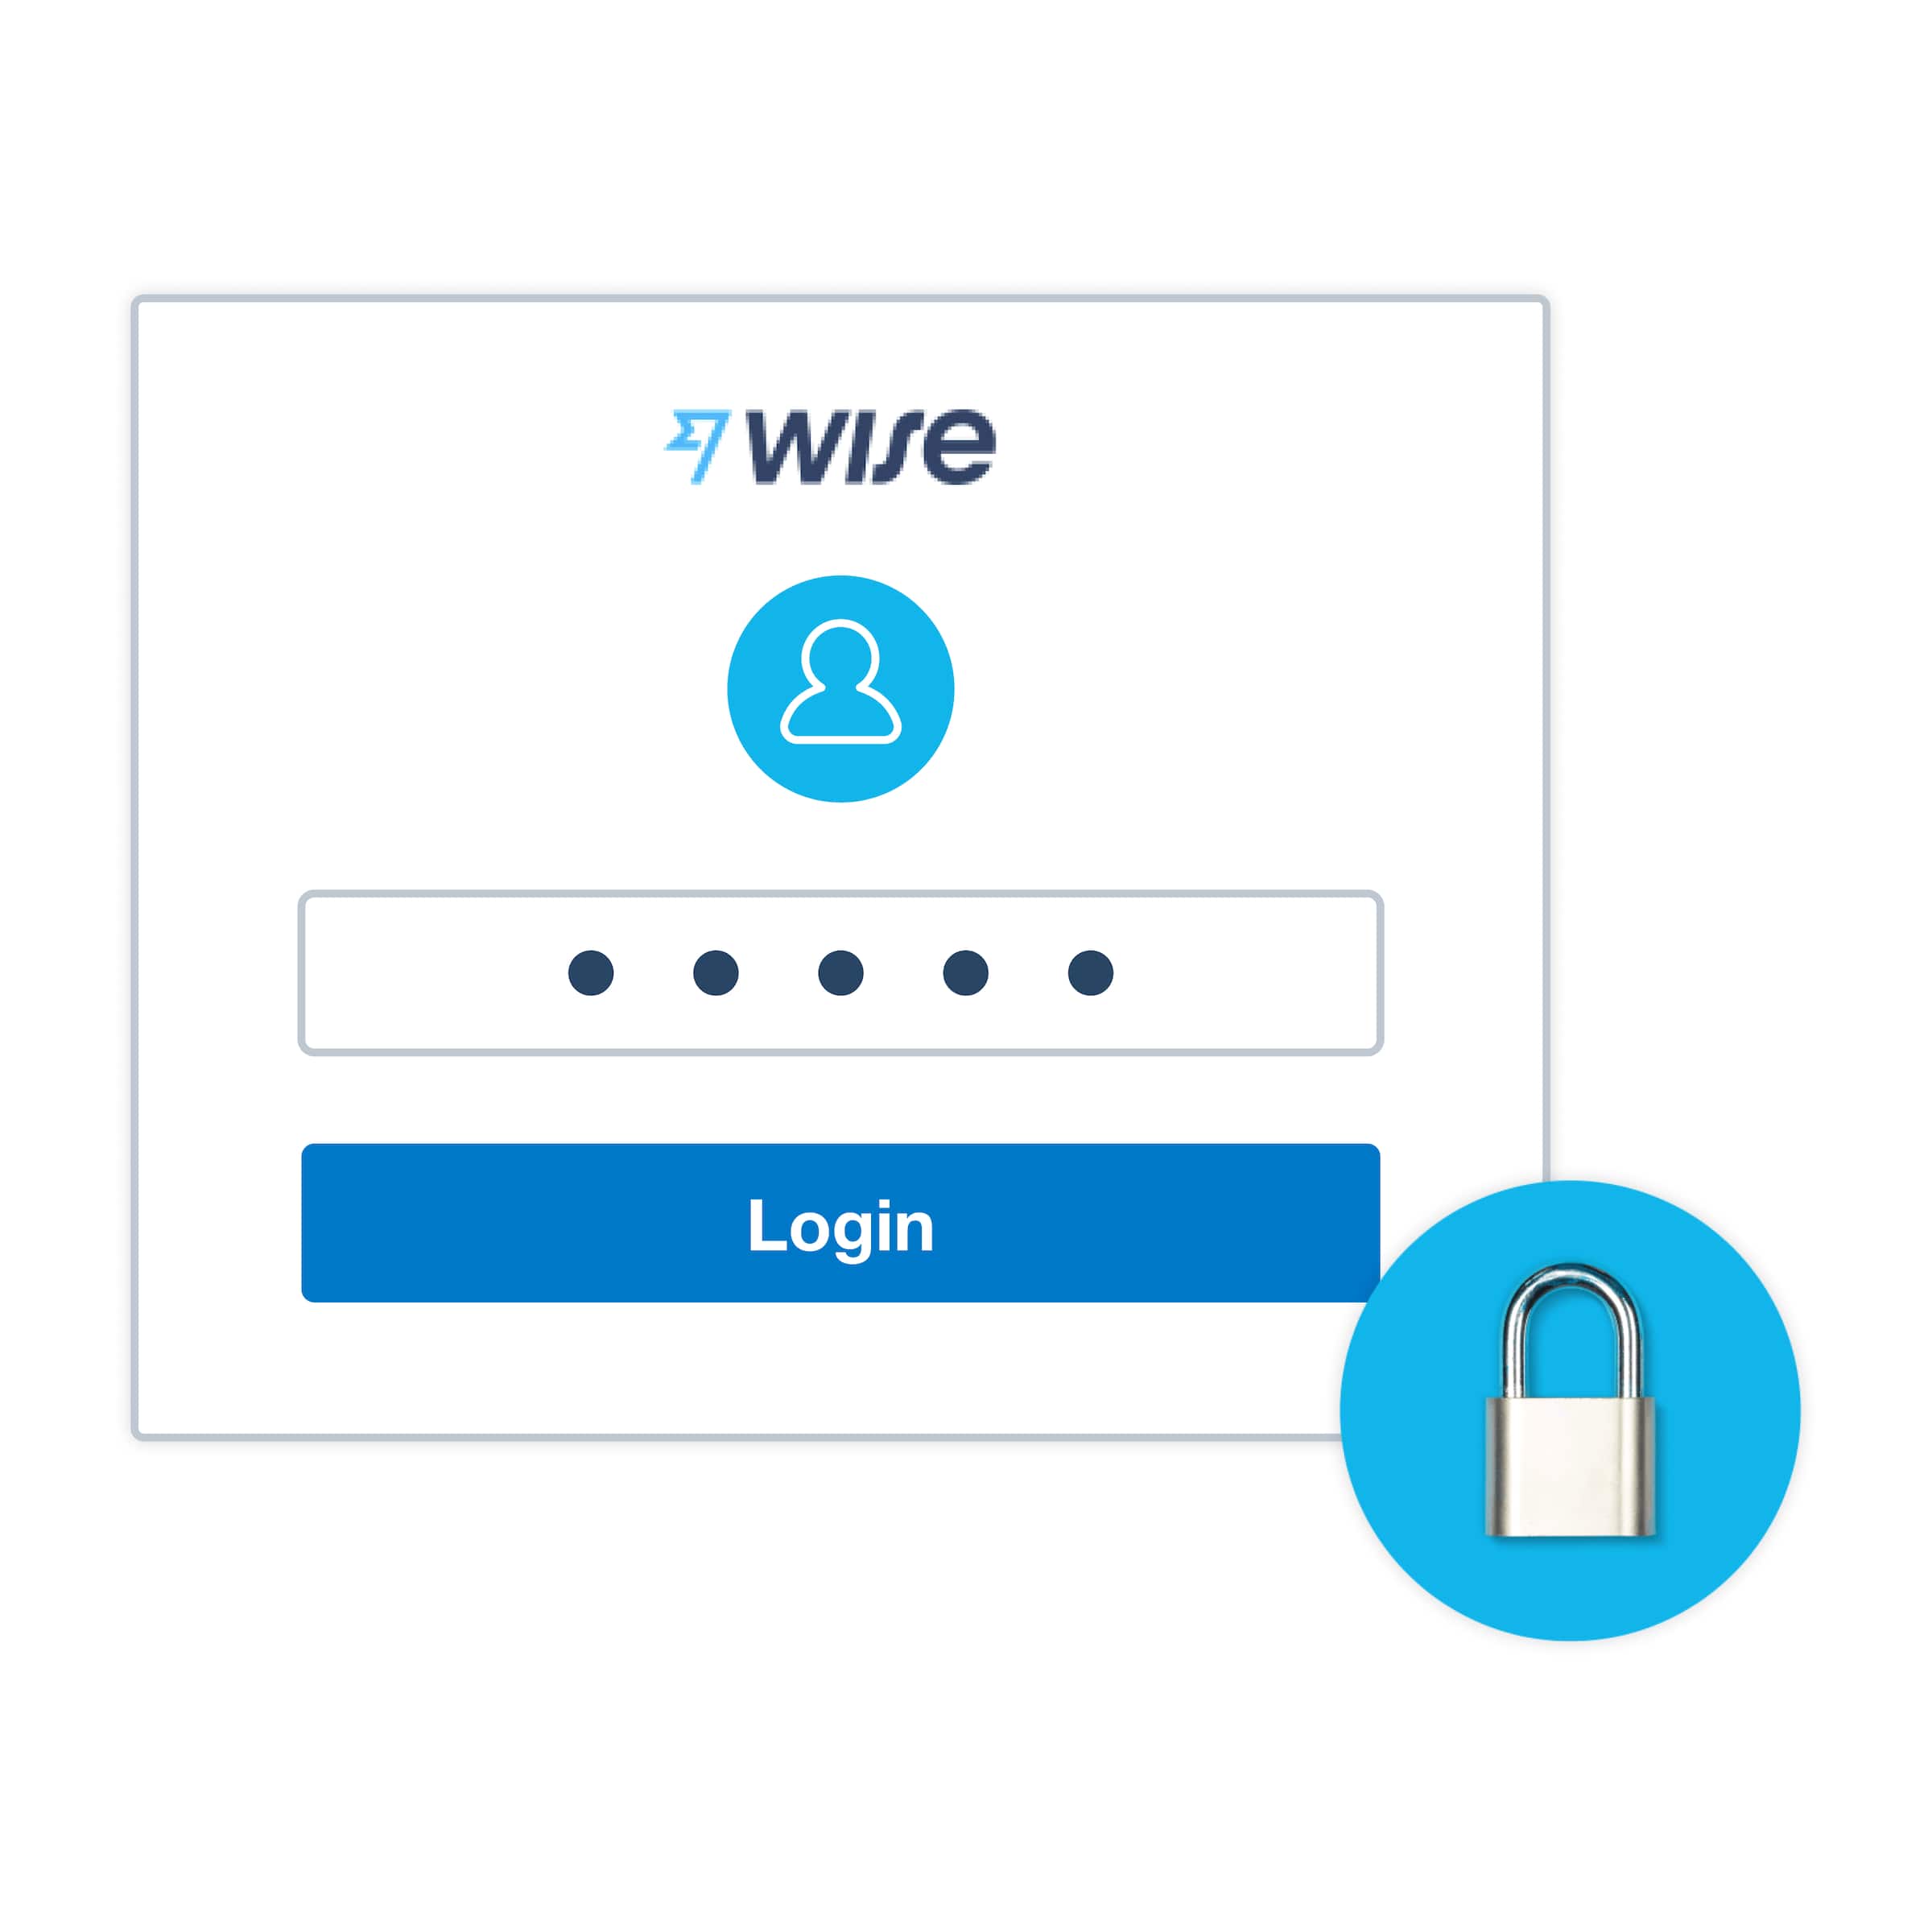 The Wise login screen displays when you connect Wise to your Xero account, helping ensure data sharing is safe and secure. 